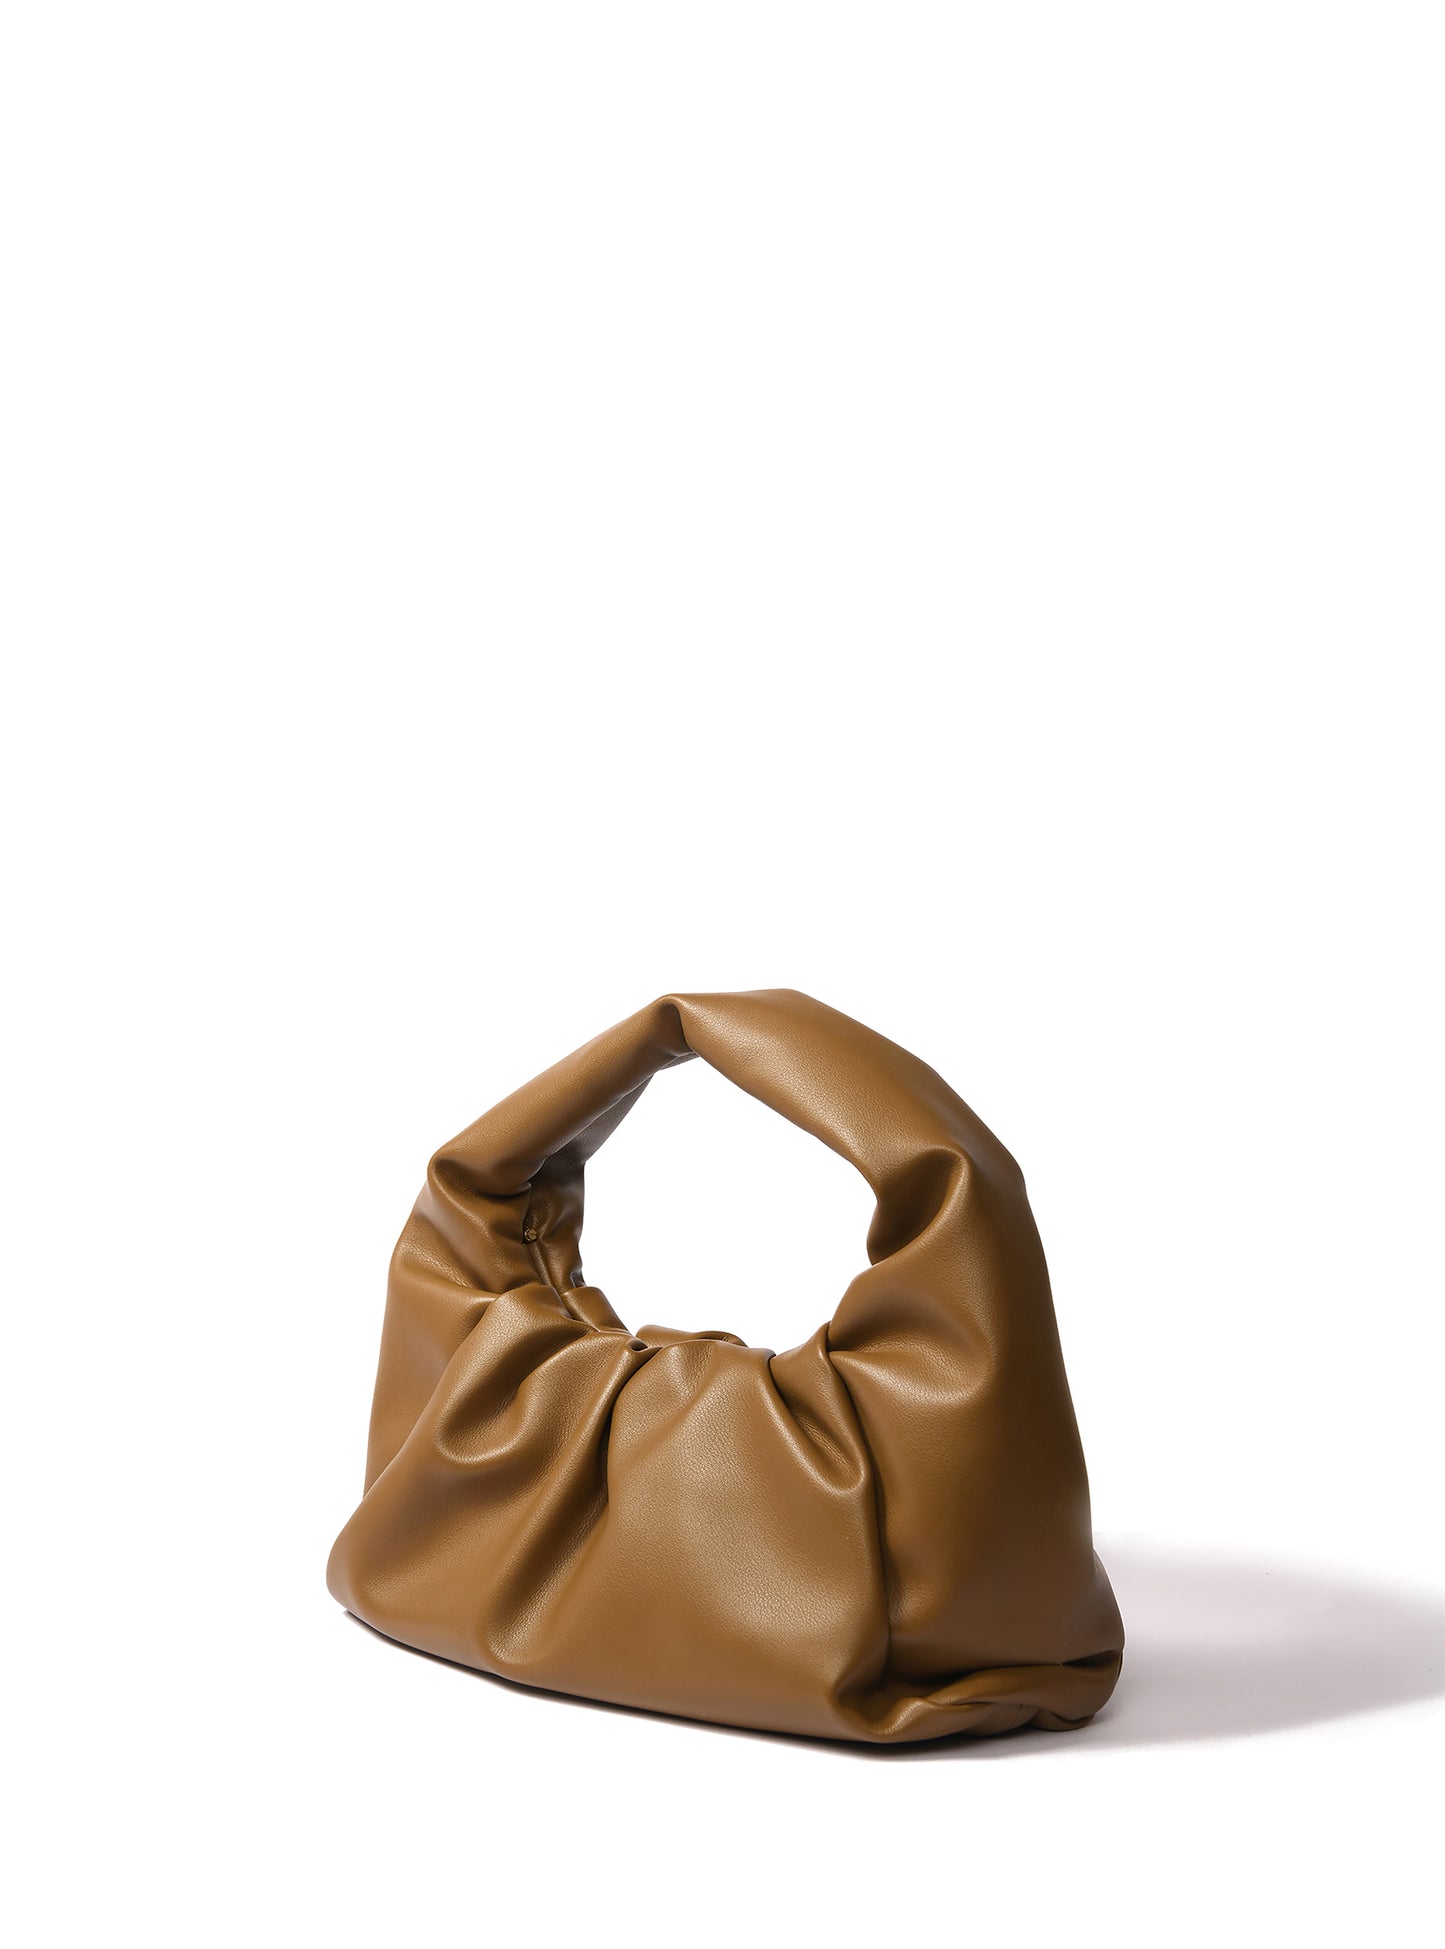 Marshmallow Croissant Bag in Soft Leather, Mustard Green